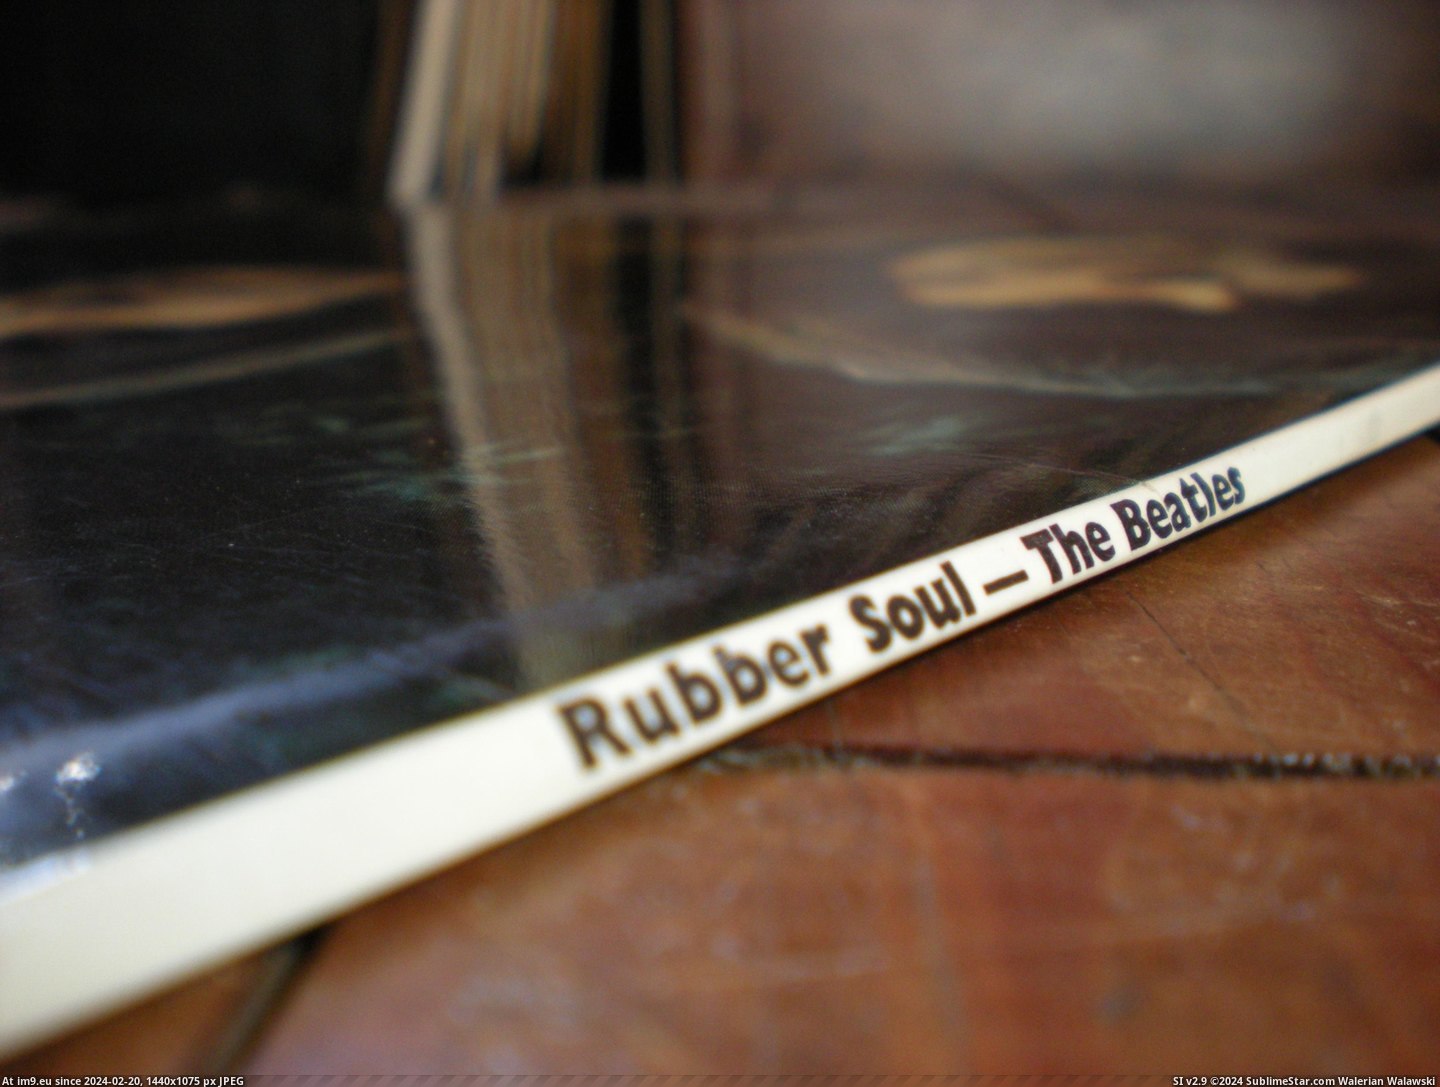 #Rubber #Stereo #Soul Rubber Soul STEREO 9 Pic. (Изображение из альбом new 1))